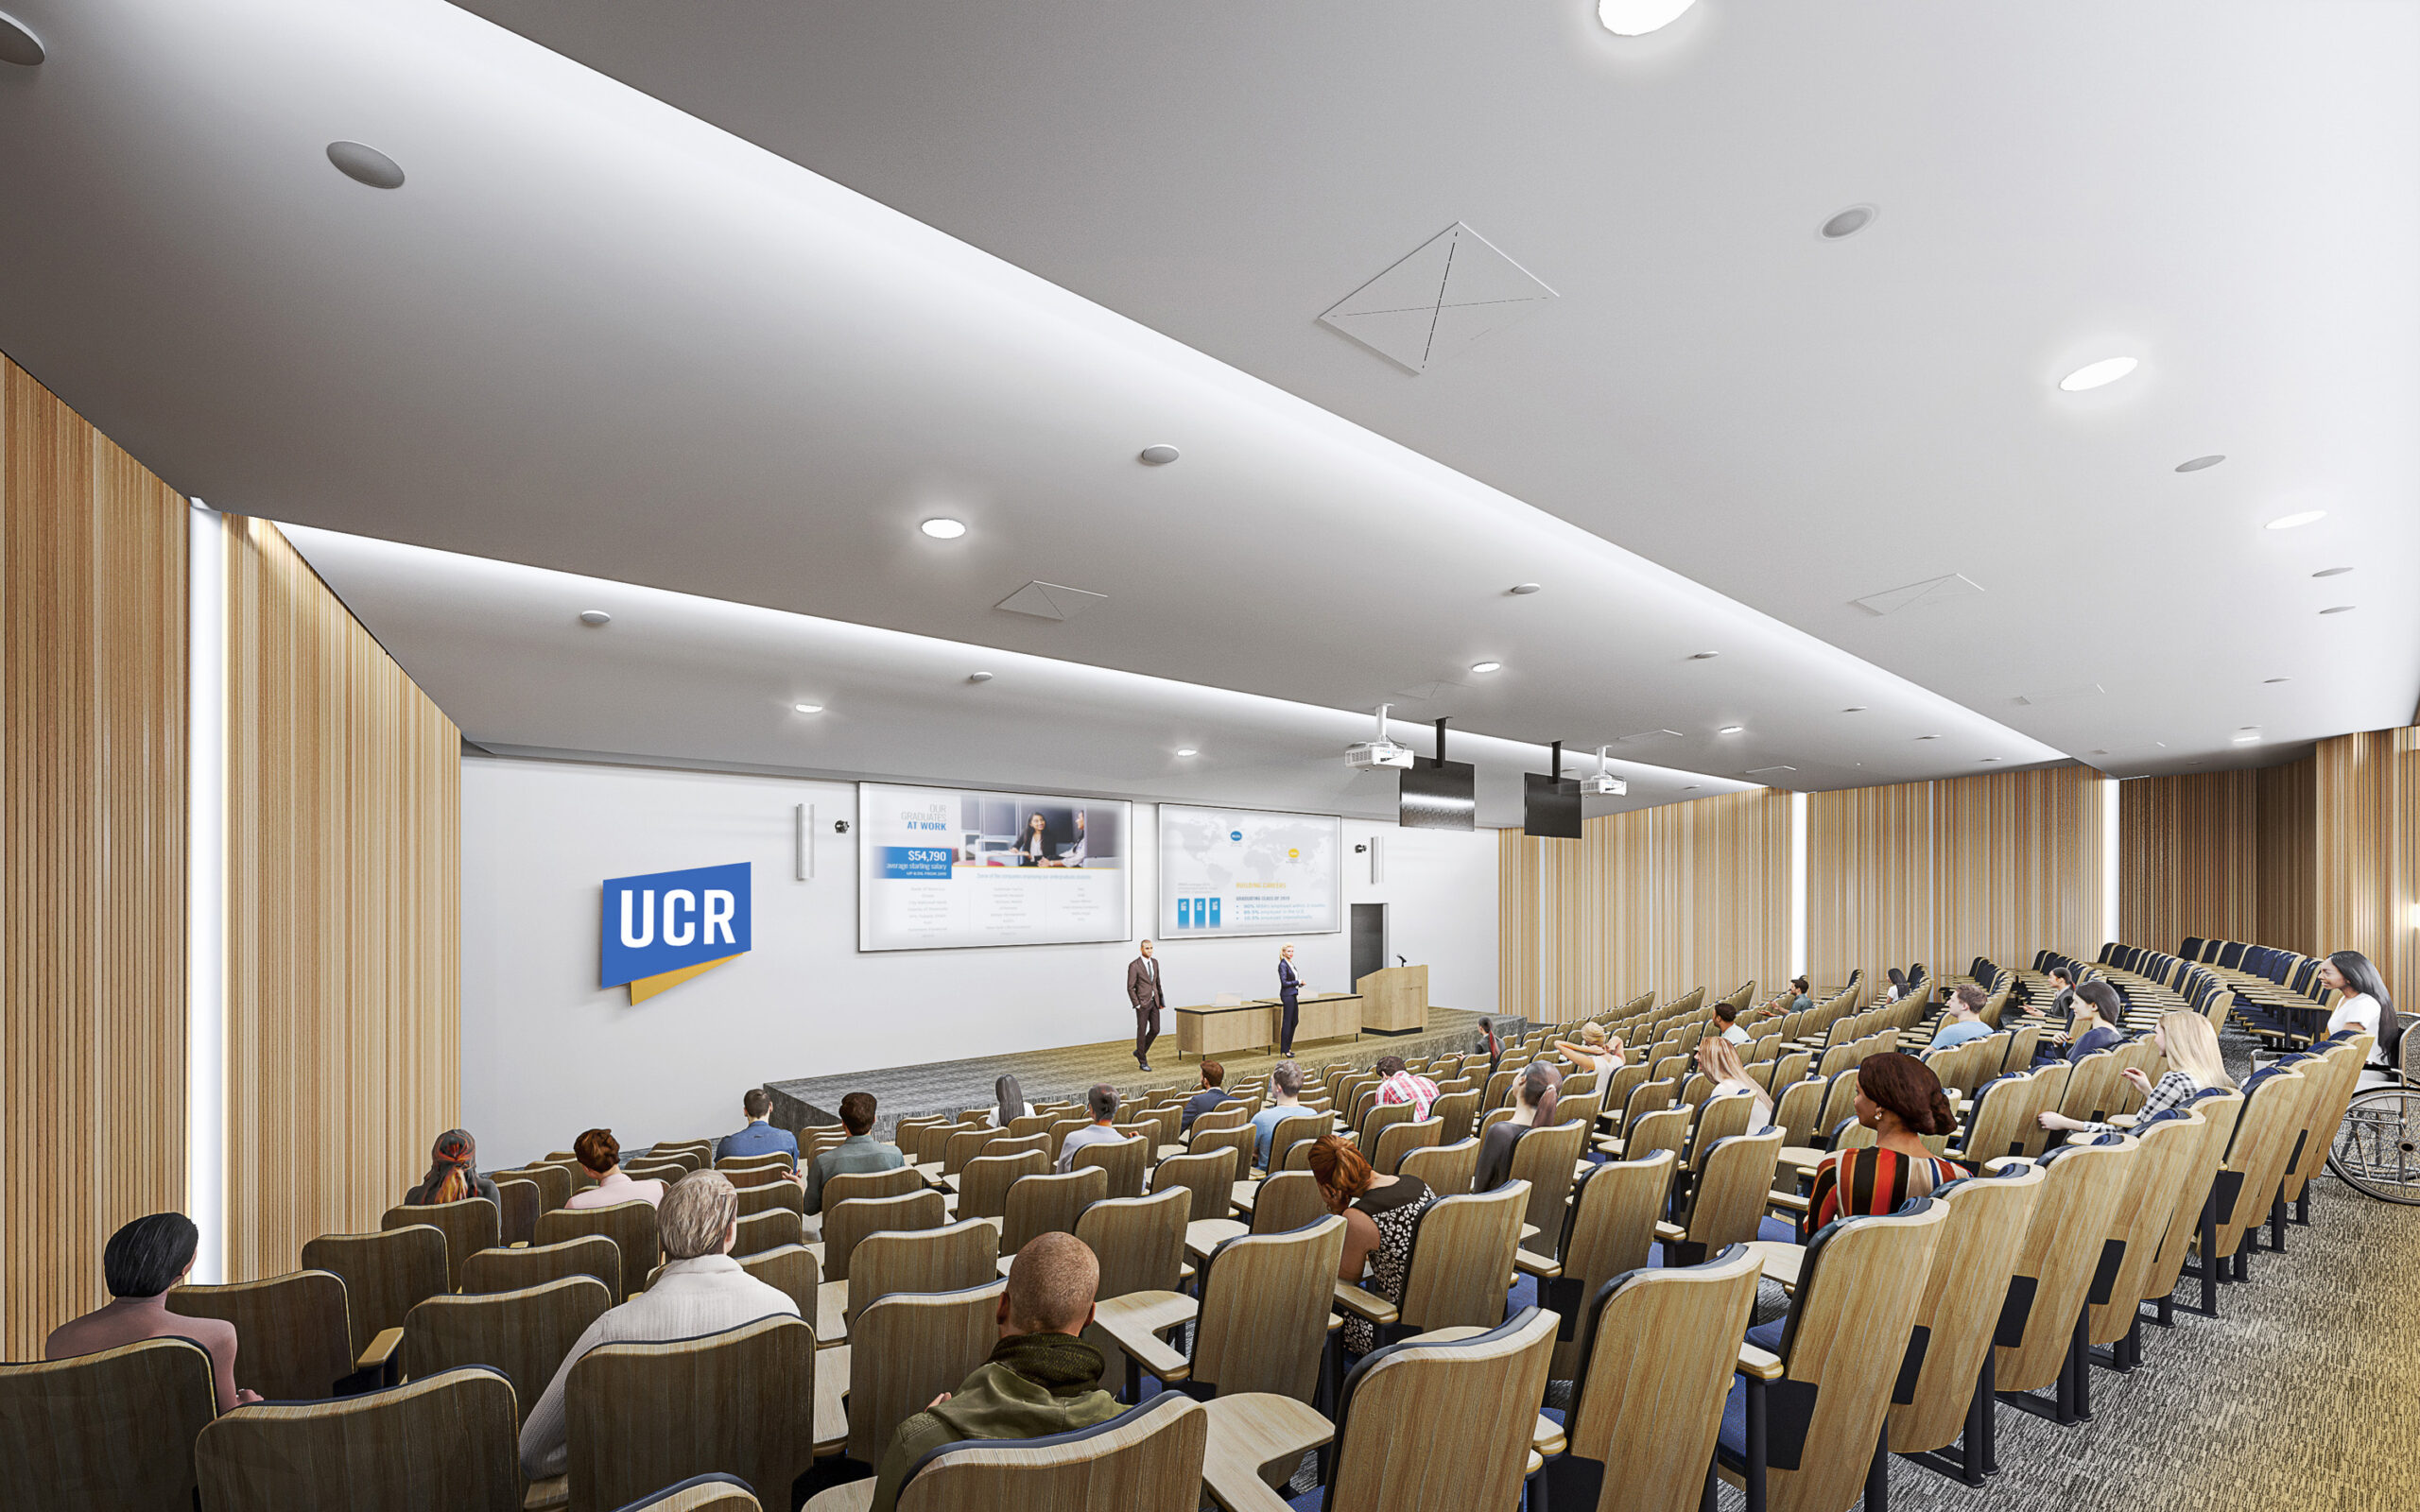 Internal CGI showing teaching spaces/rooms at UC Riverside School of Business